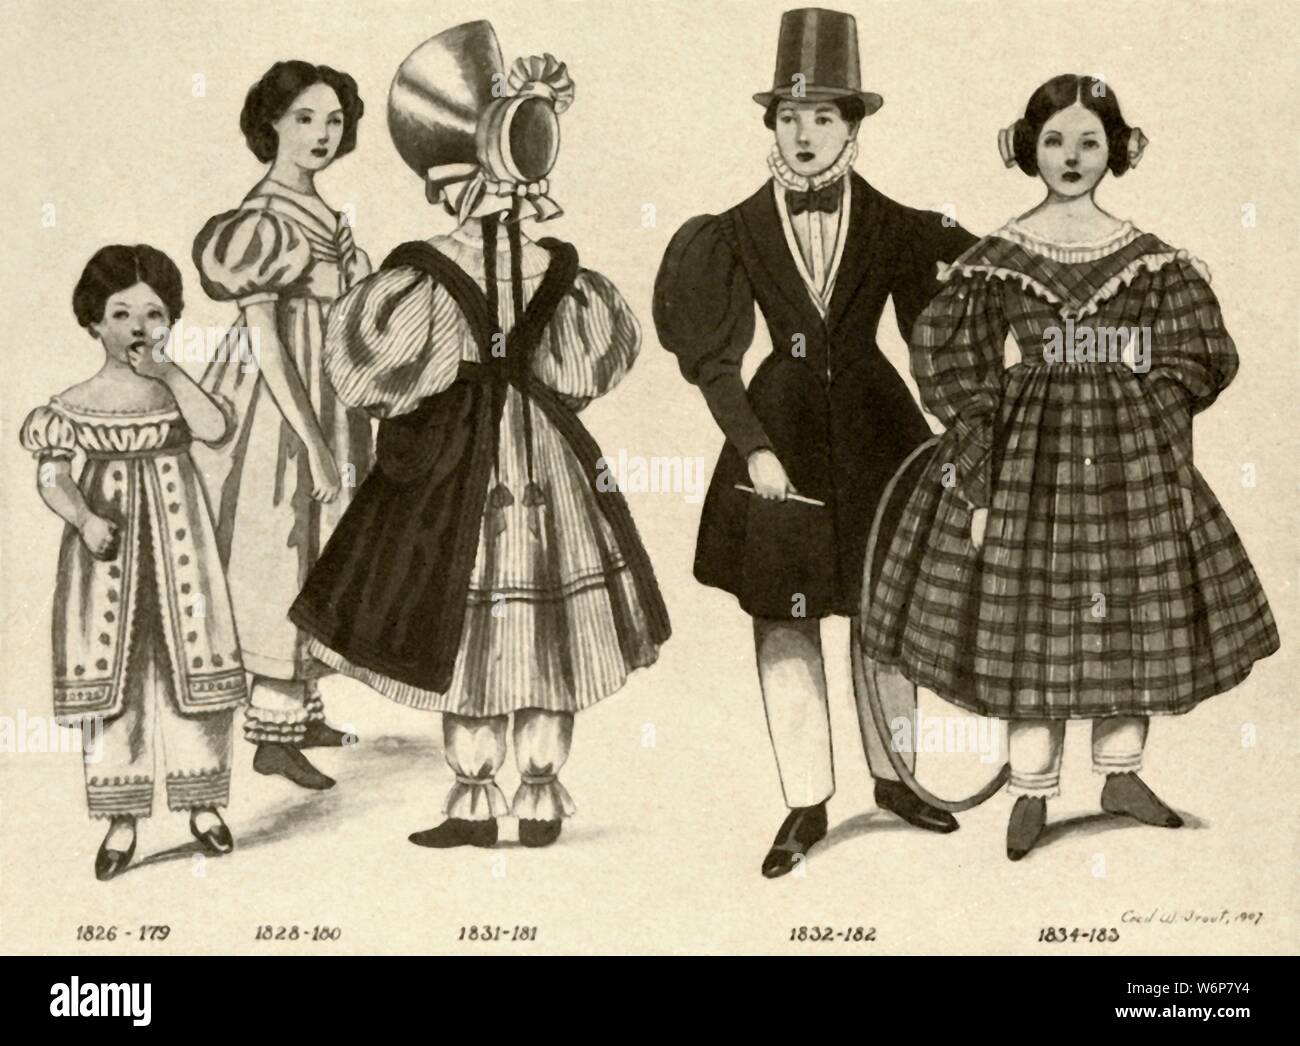 'Children's clothing from 1820-1840', 1907, (1937). From &quot;History of American Costume - Book One 1607-1800&quot;, by Elisabeth McClellan. [Tudor Publishing Company, New York, 1937] Stock Photo